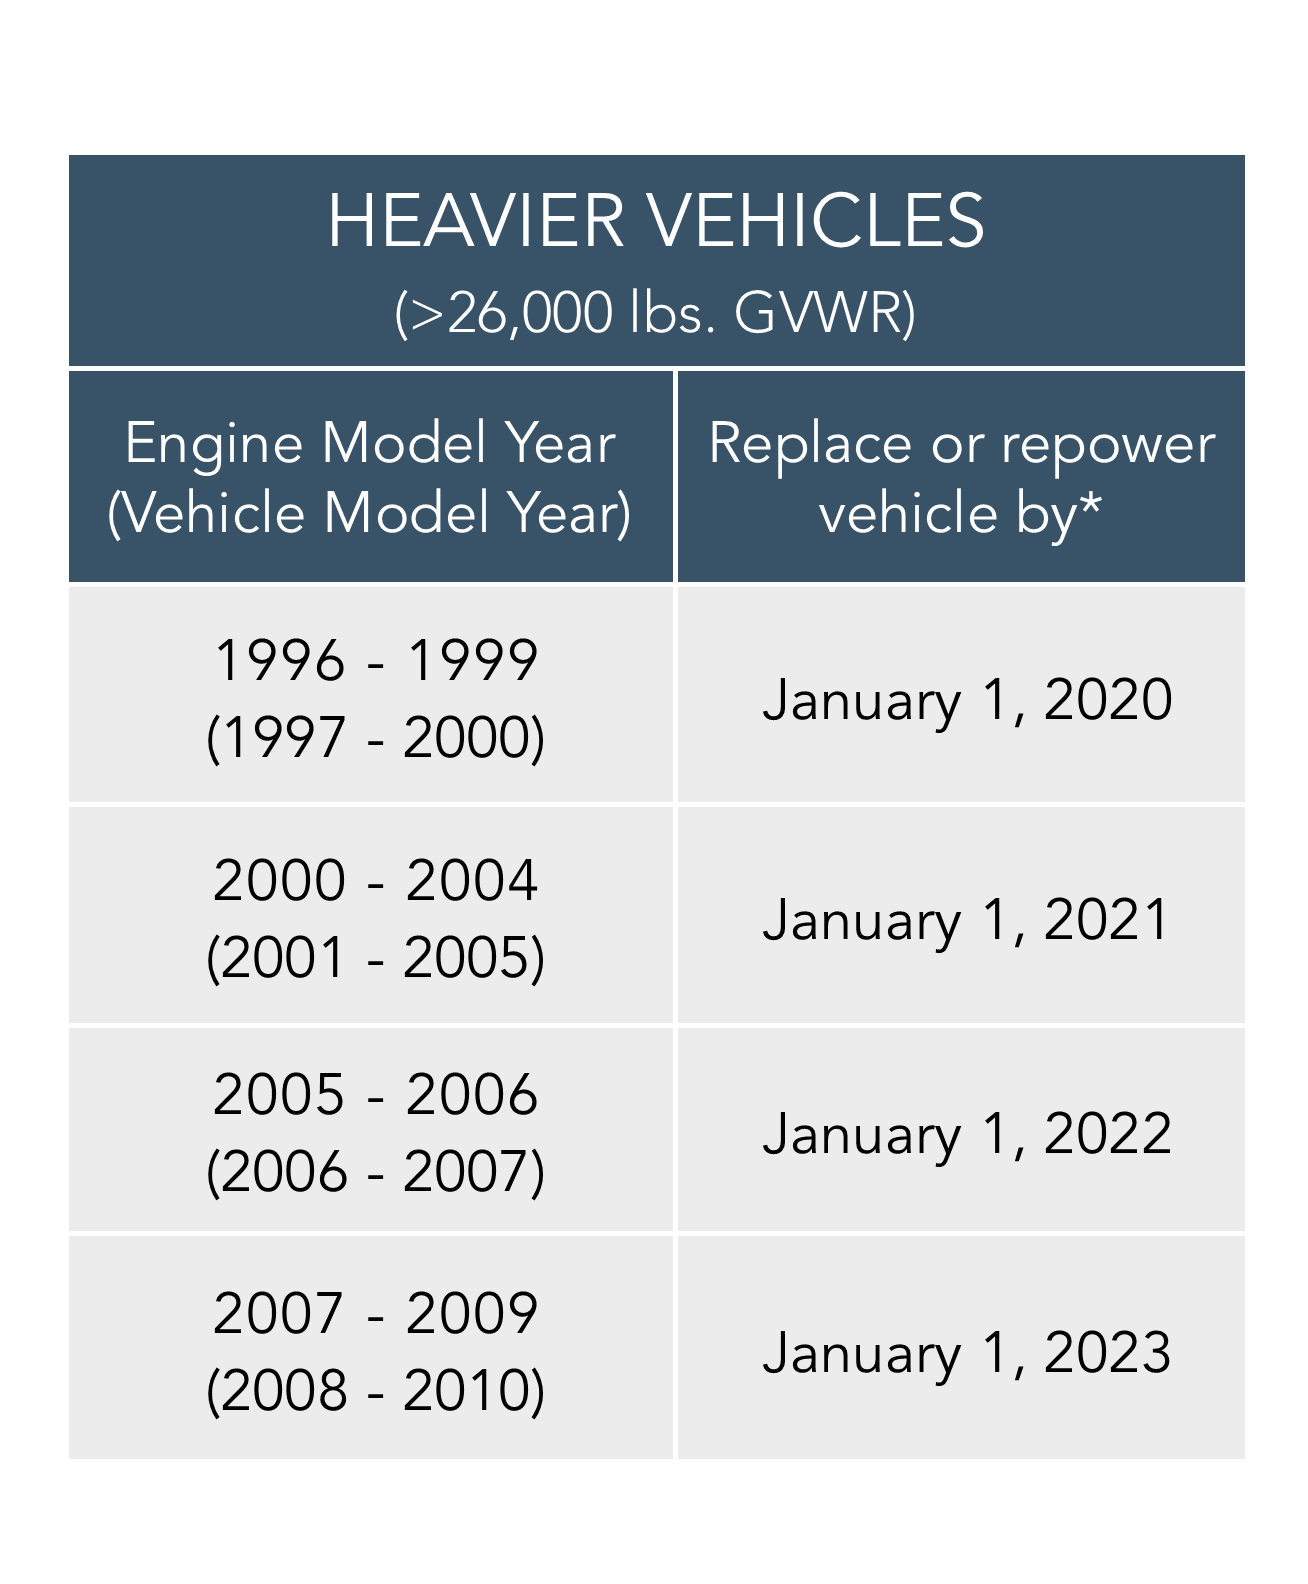 Heavy vehicles above 26,000lbs GVWR: 1993 and older model year engines need no particulate matter filter, but require repower or replacement by 1/1/15. 1994-1995 model year engines require no particulate filter, but require repower or replacement by 1/1/16. 1996-1999 model year engines required a particulate matter filter by 1/1/12, and will require a repower or replacement by 1/1/20. 2000-2004 model year engines required a particulate matter filter by 1/1/13, and require a repower or replacement by 1/1/21. 2005-2006 model year engines required a particulate matter filter by 1/1/14, and will require a repower or replacement by 1/1/22. 2007-2009 model year engines required a particulate matter filter by 1/1/14 if not allready manufacturer-equipped, and require repower or replacement by 1/1/23.